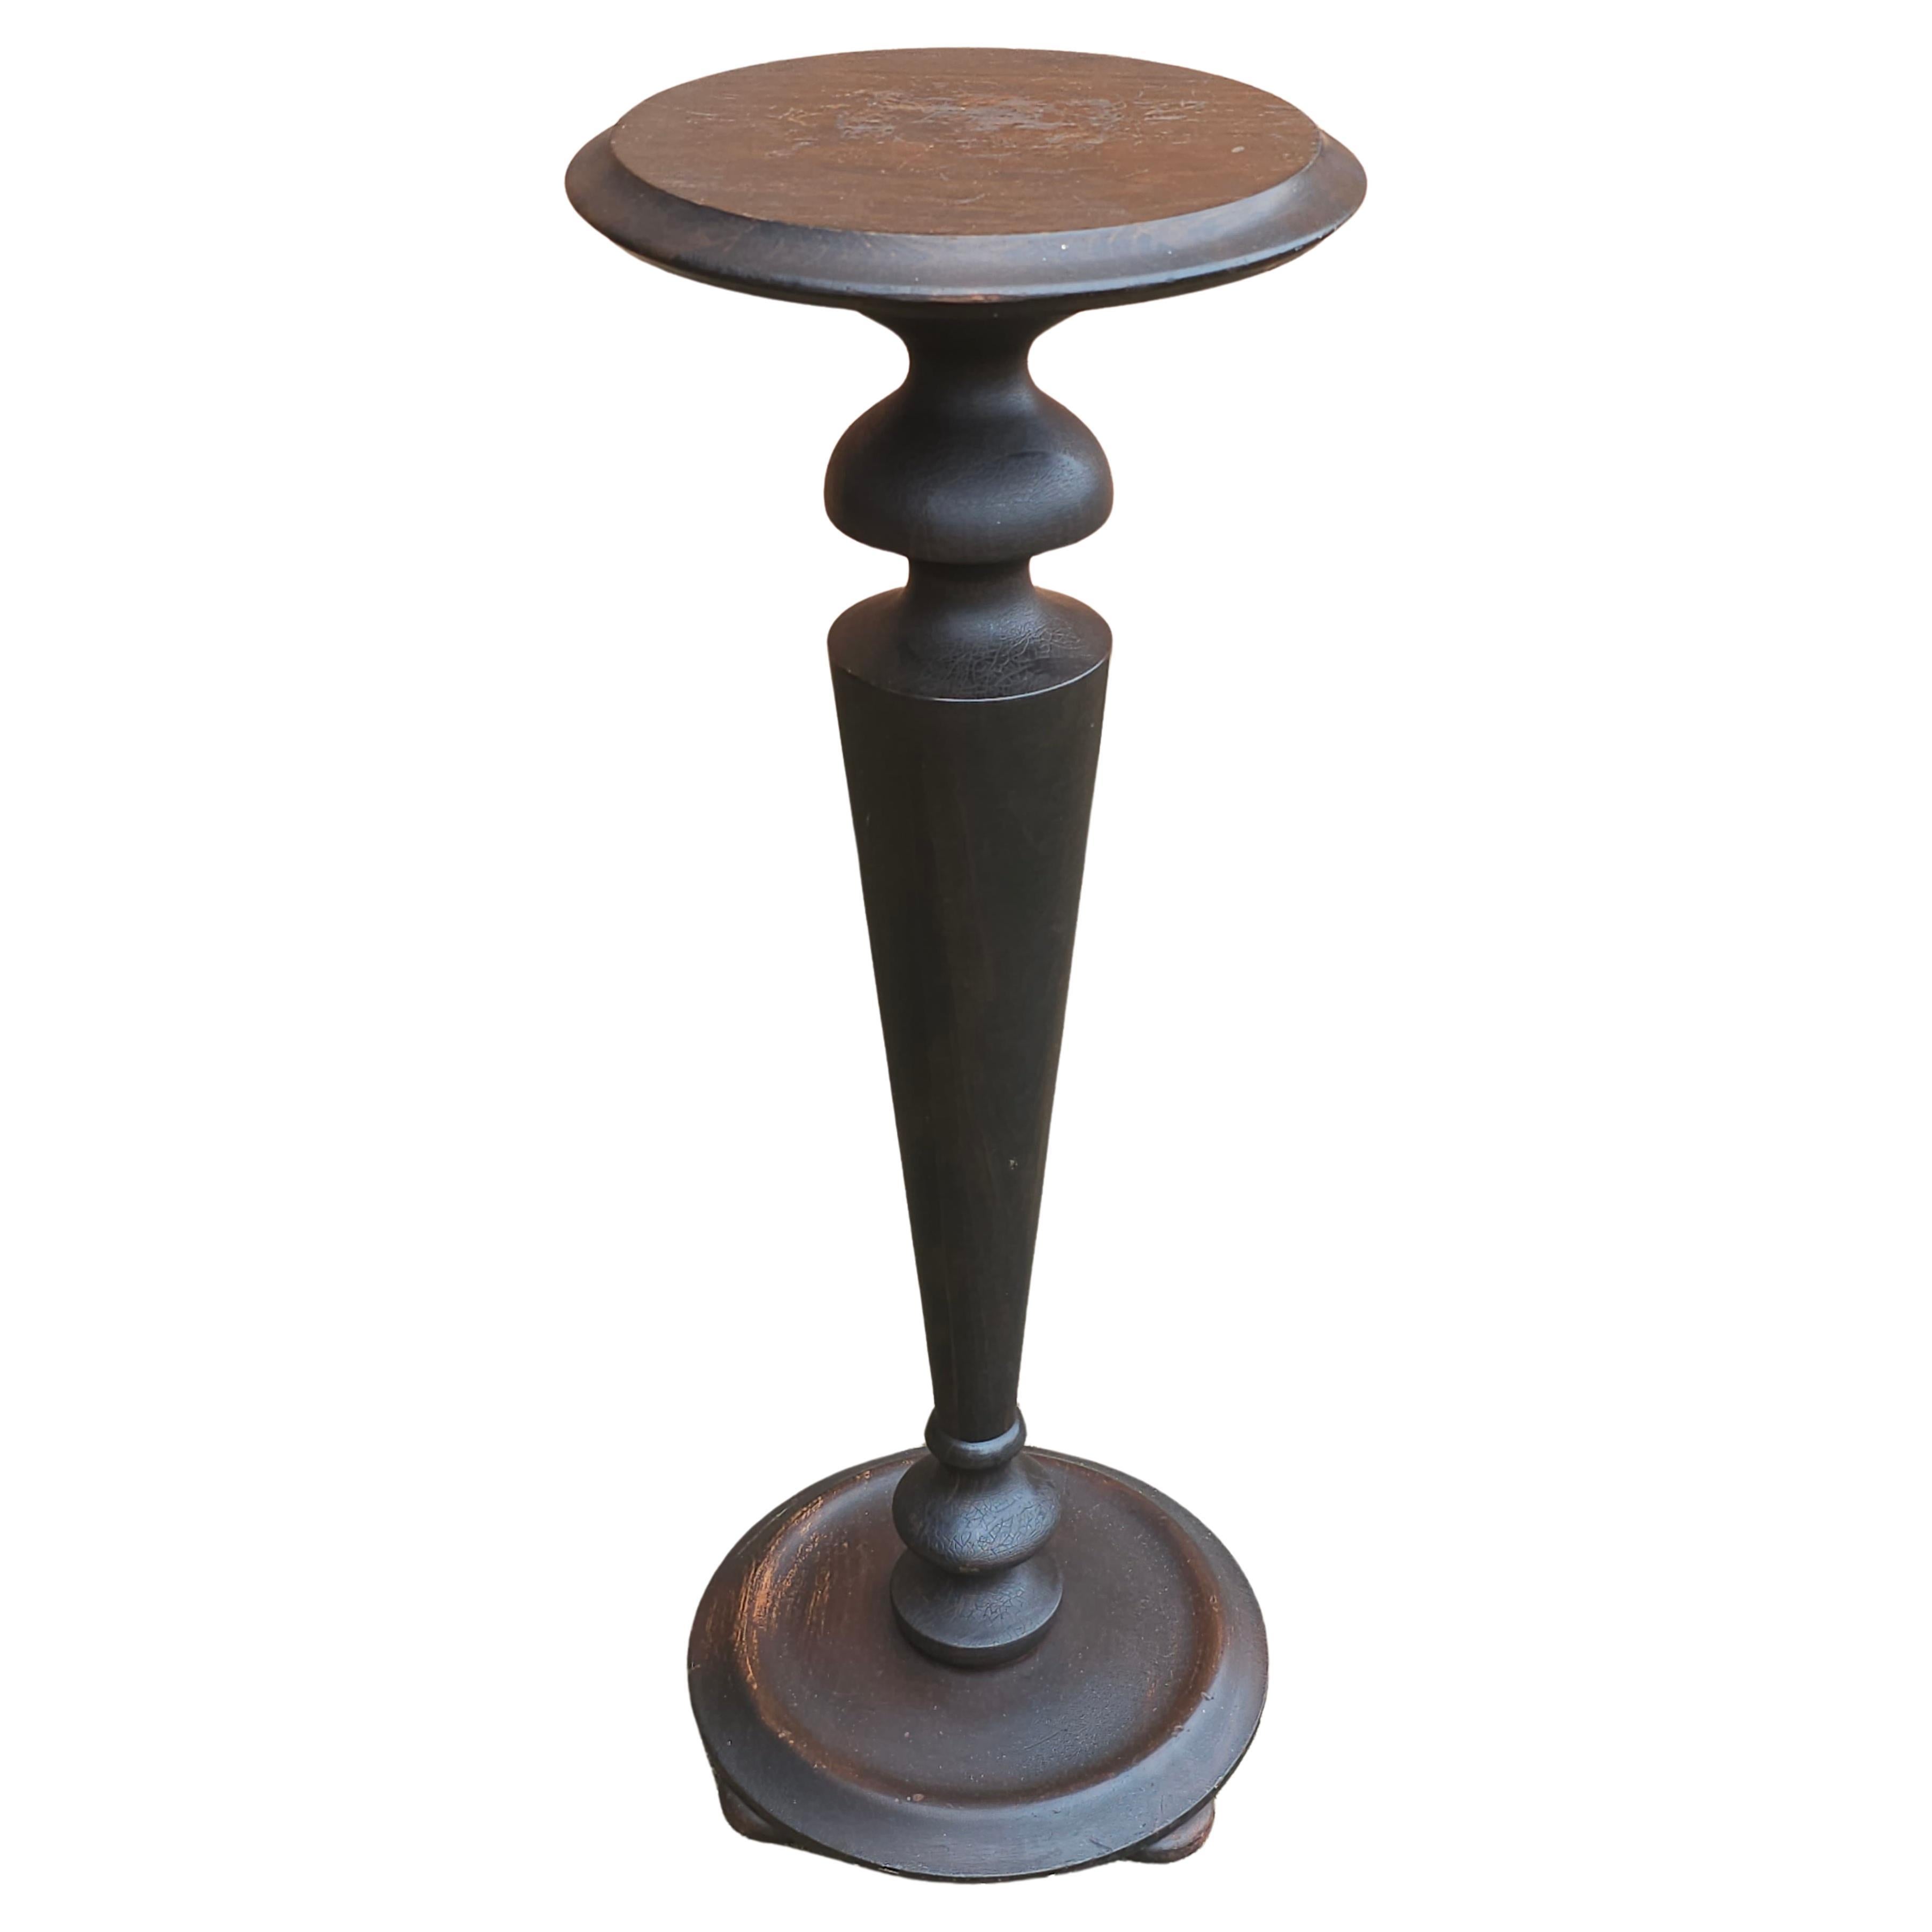 Late 19th Century Neoclassical Stained Mahogany Pedestal